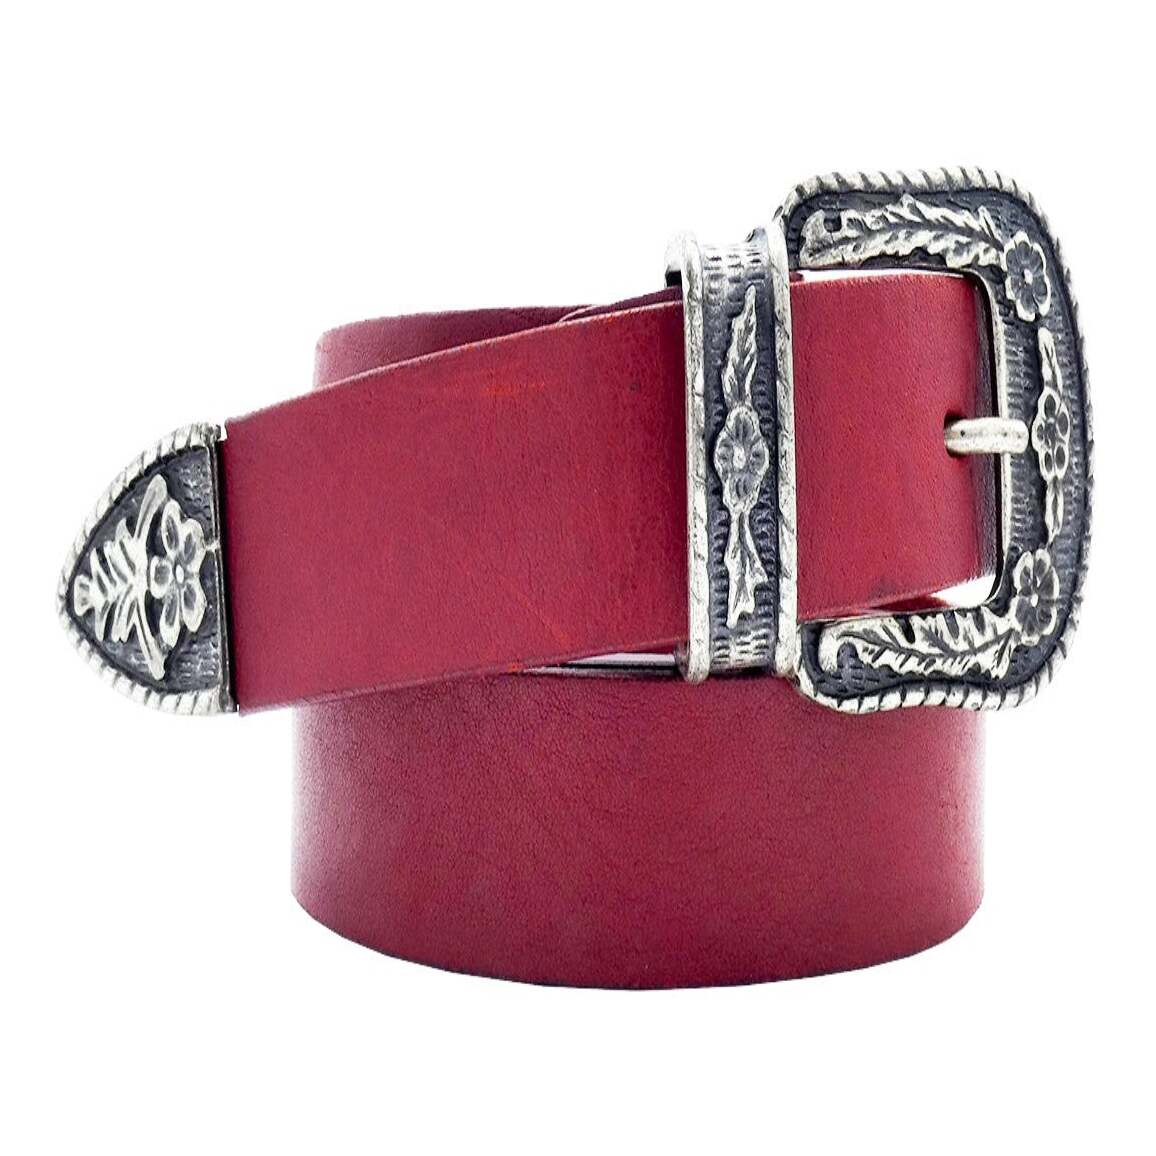 2.5cm Gauguin leather belt with antique silver zamak buckle and loop